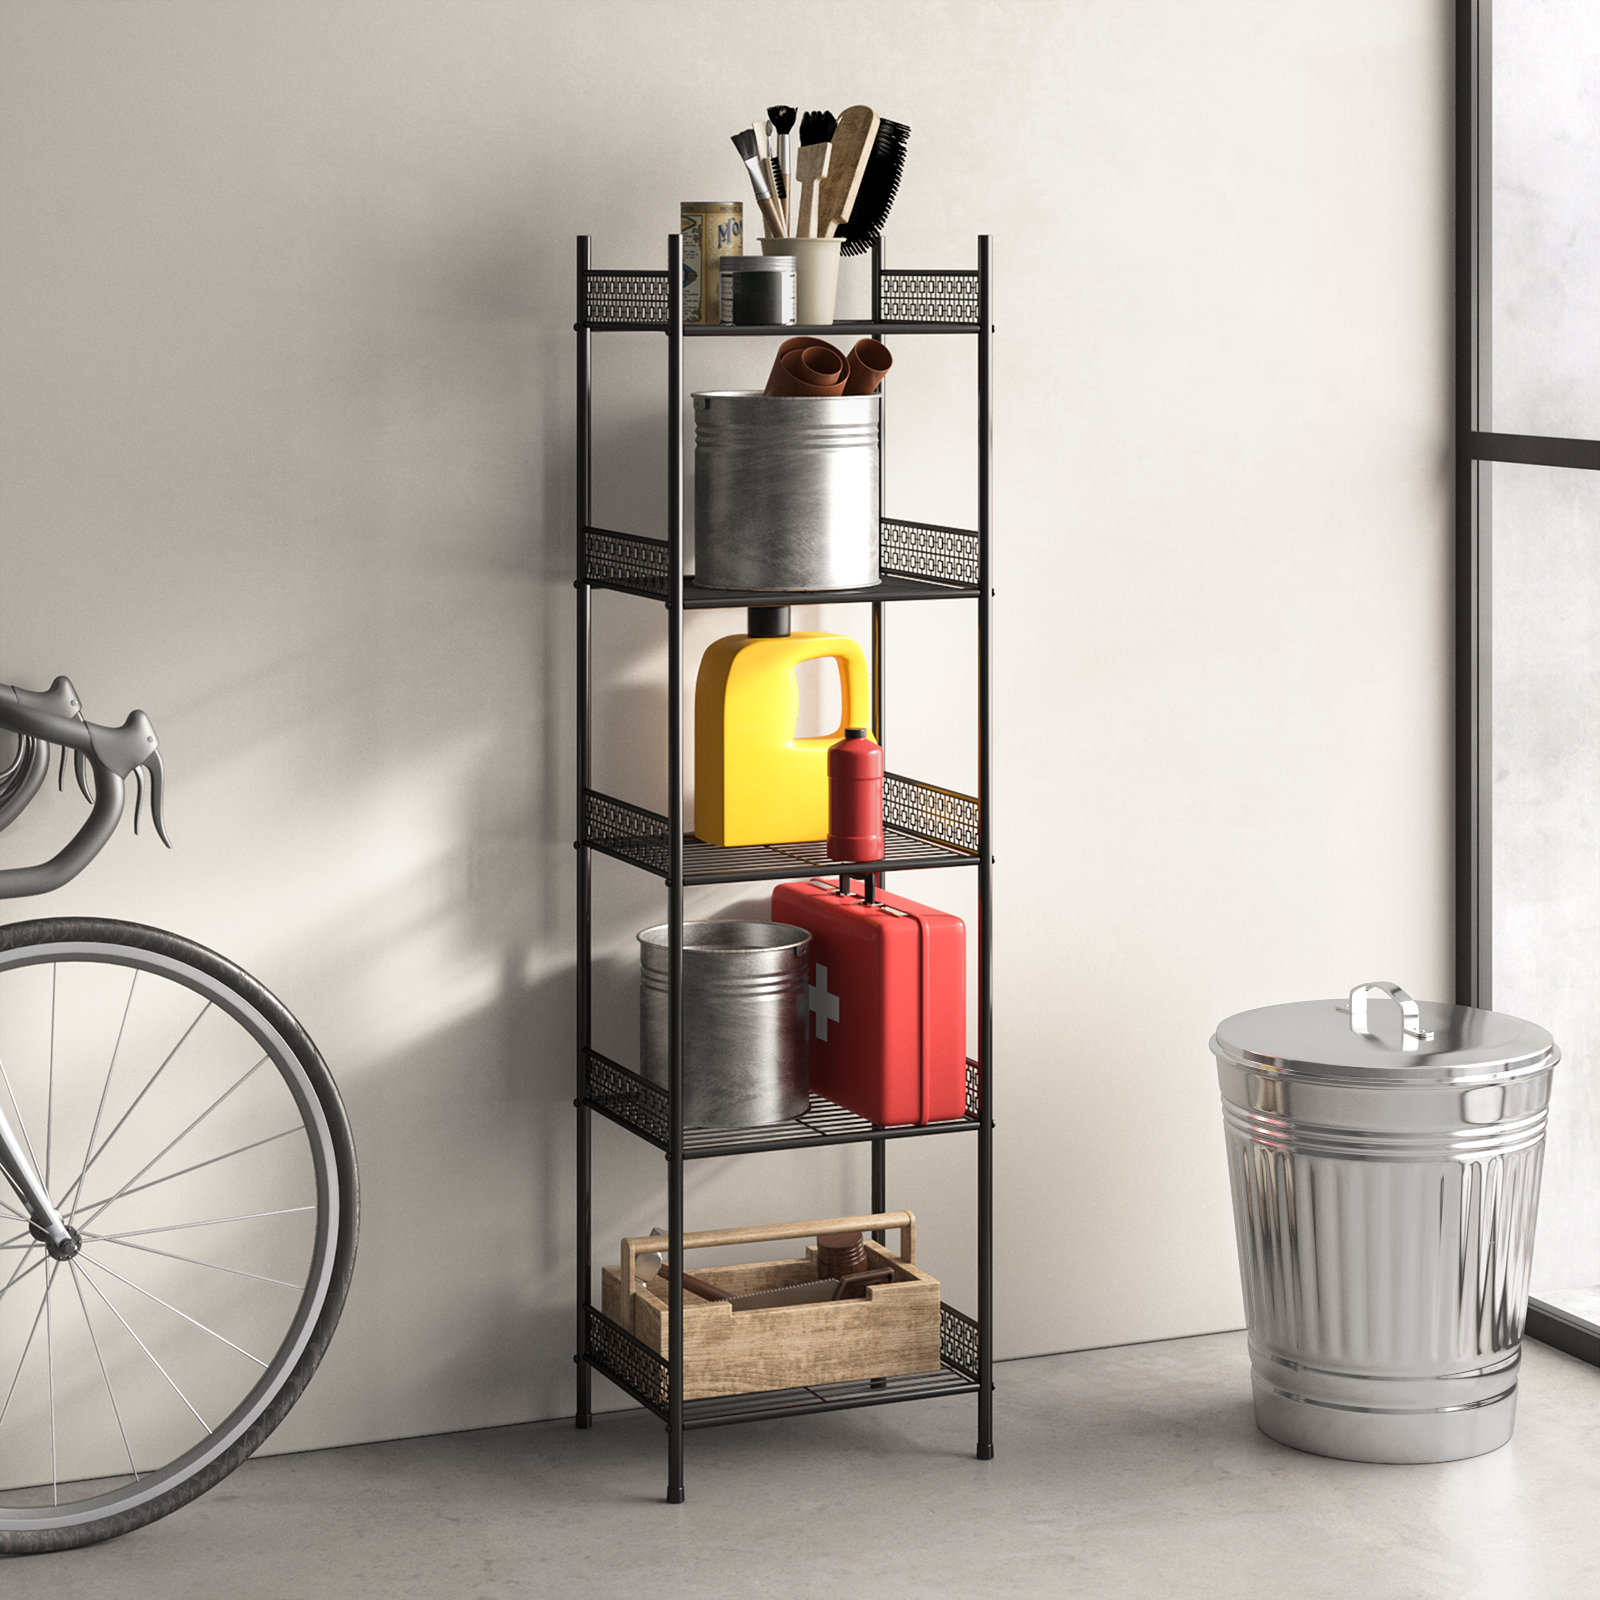 Mount-It! Height Adjustable 5 Tier Wire Shelving with Wheels | Rolling  Garage Shelves, Closet Metal Racks with Shelves and Shelving or Utility  Shelf